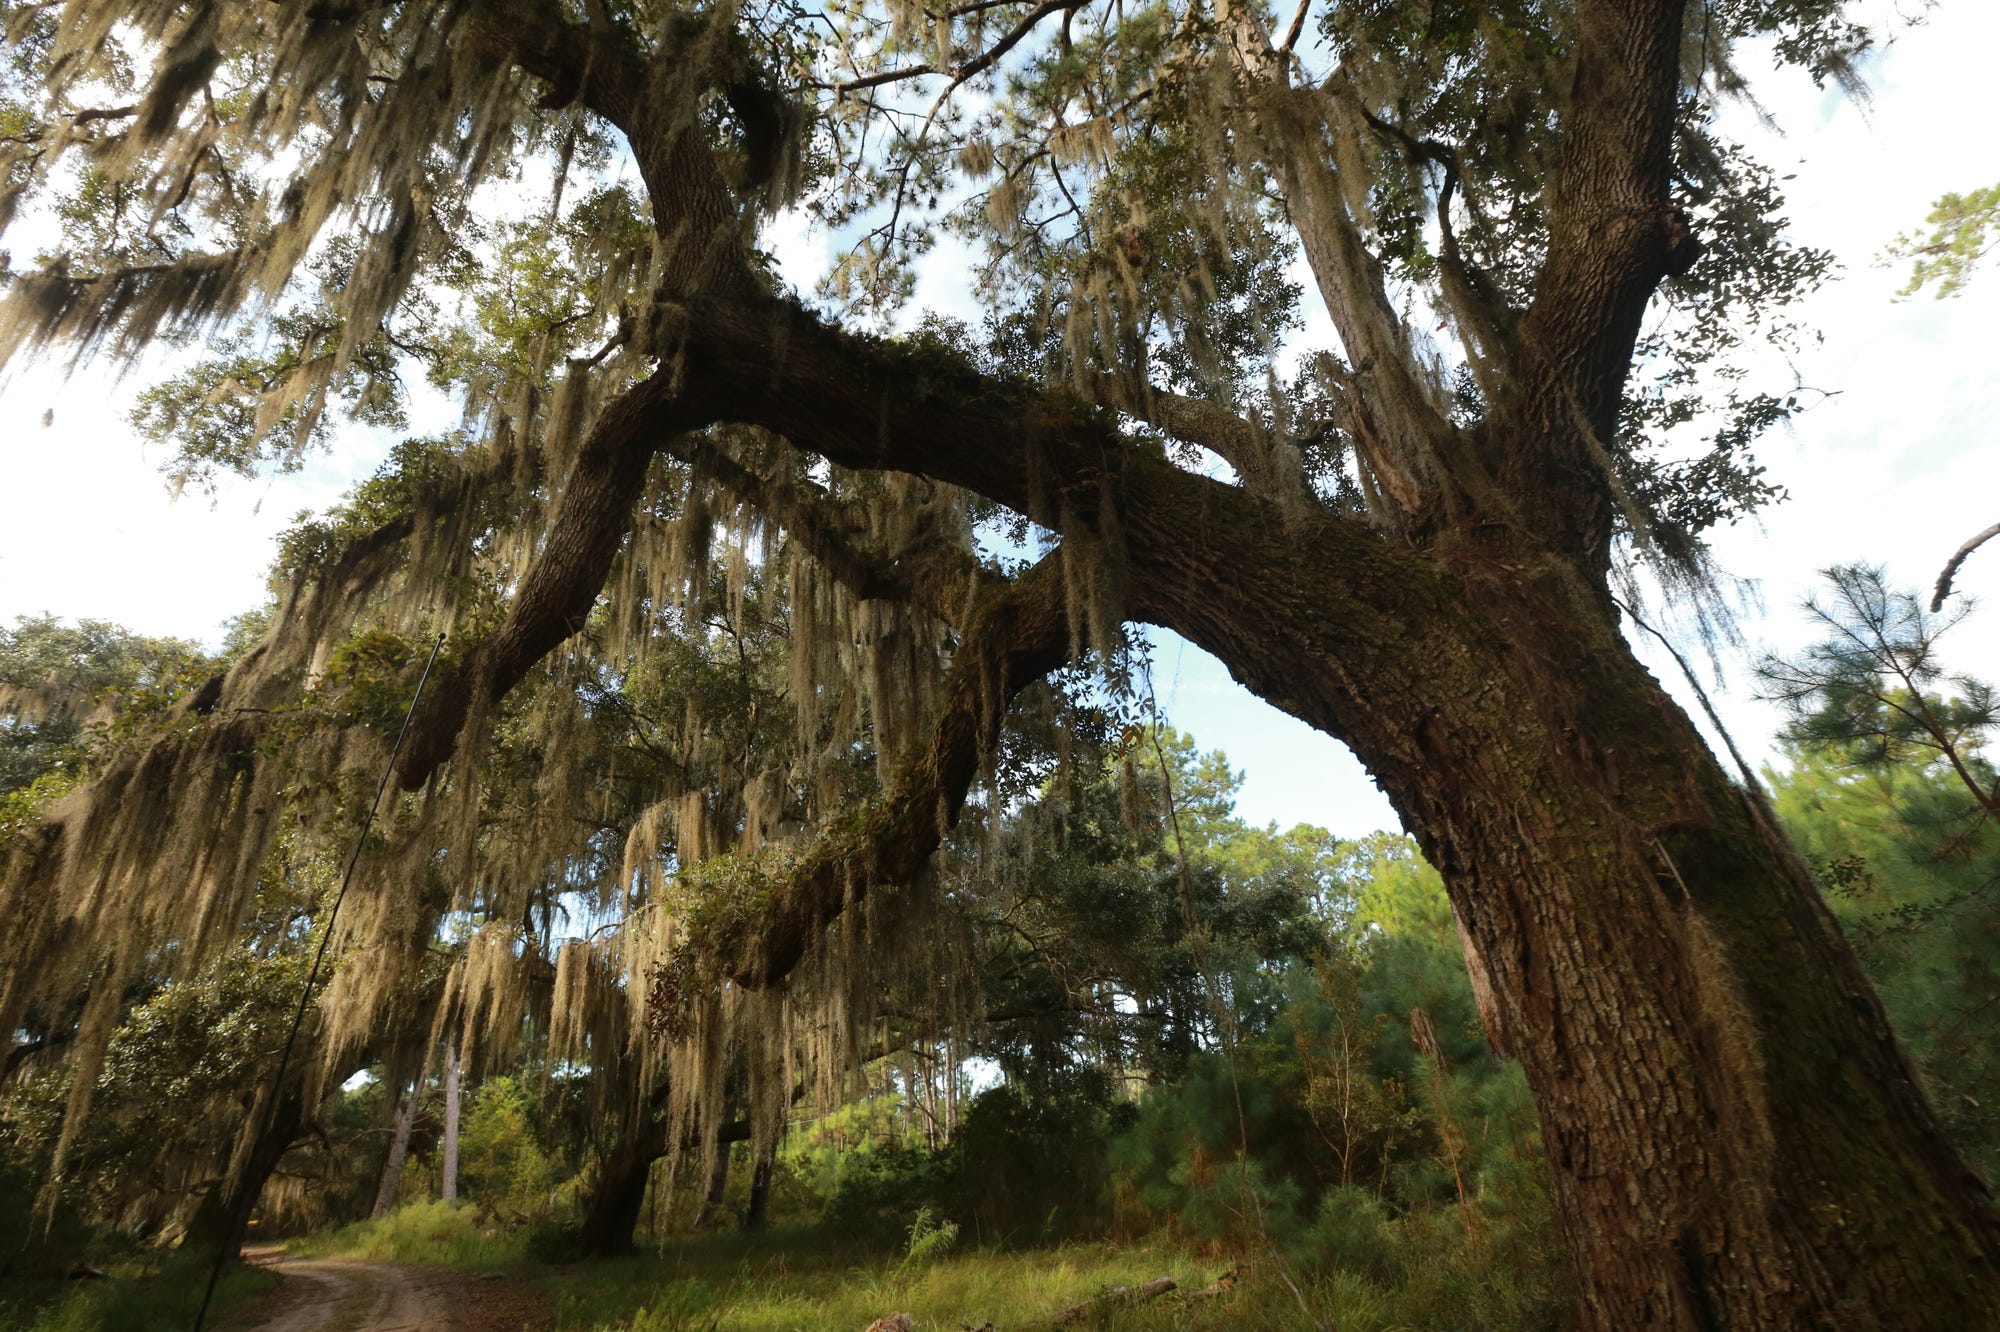 A large Oak looms over one of the dirt roads on Sapelo Island.